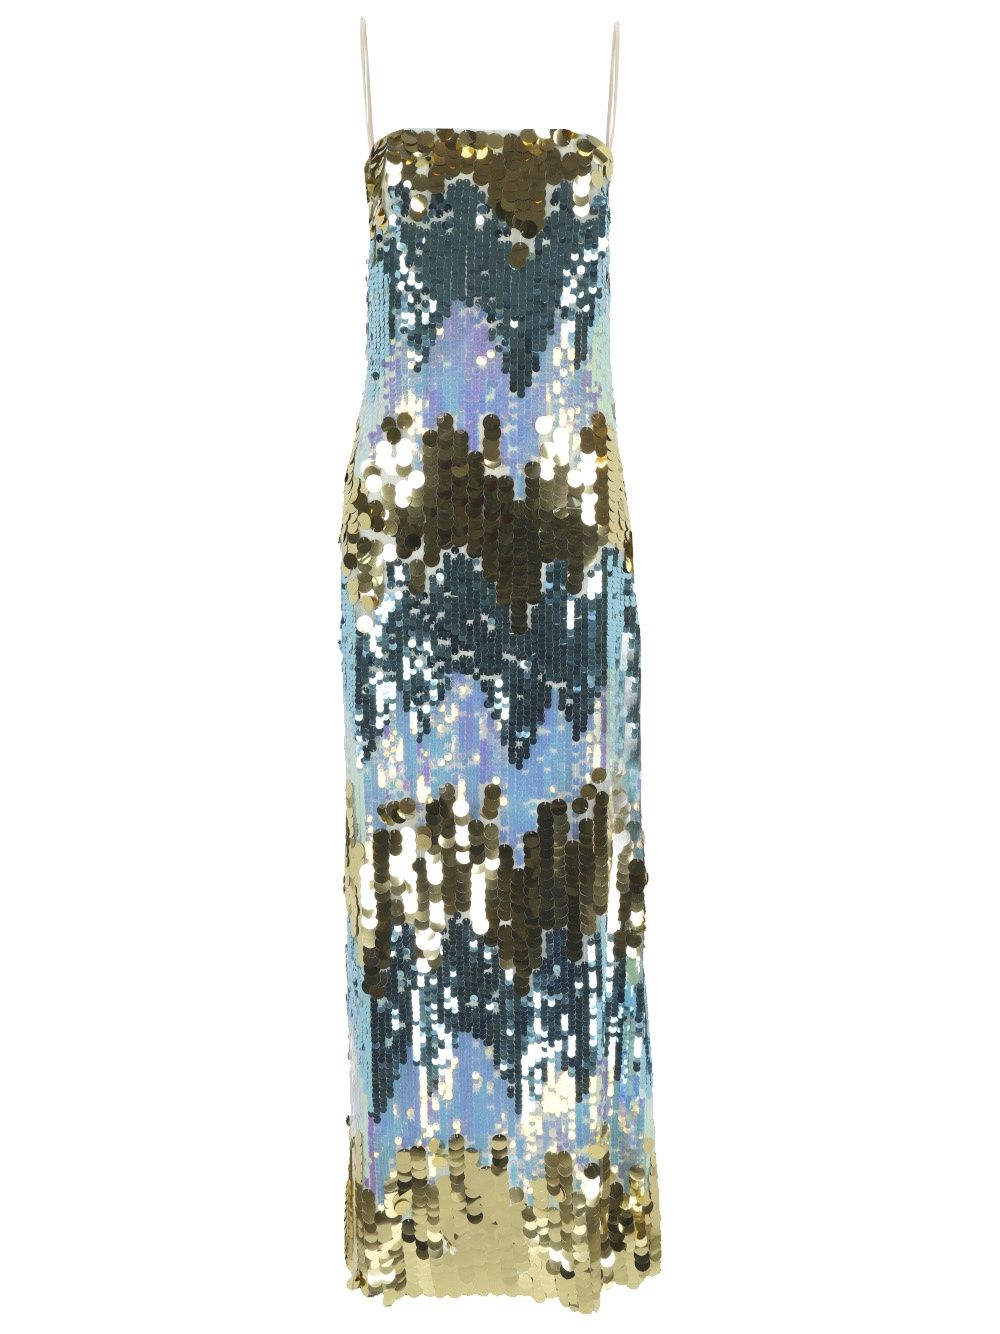 Dress with sky blue sequins